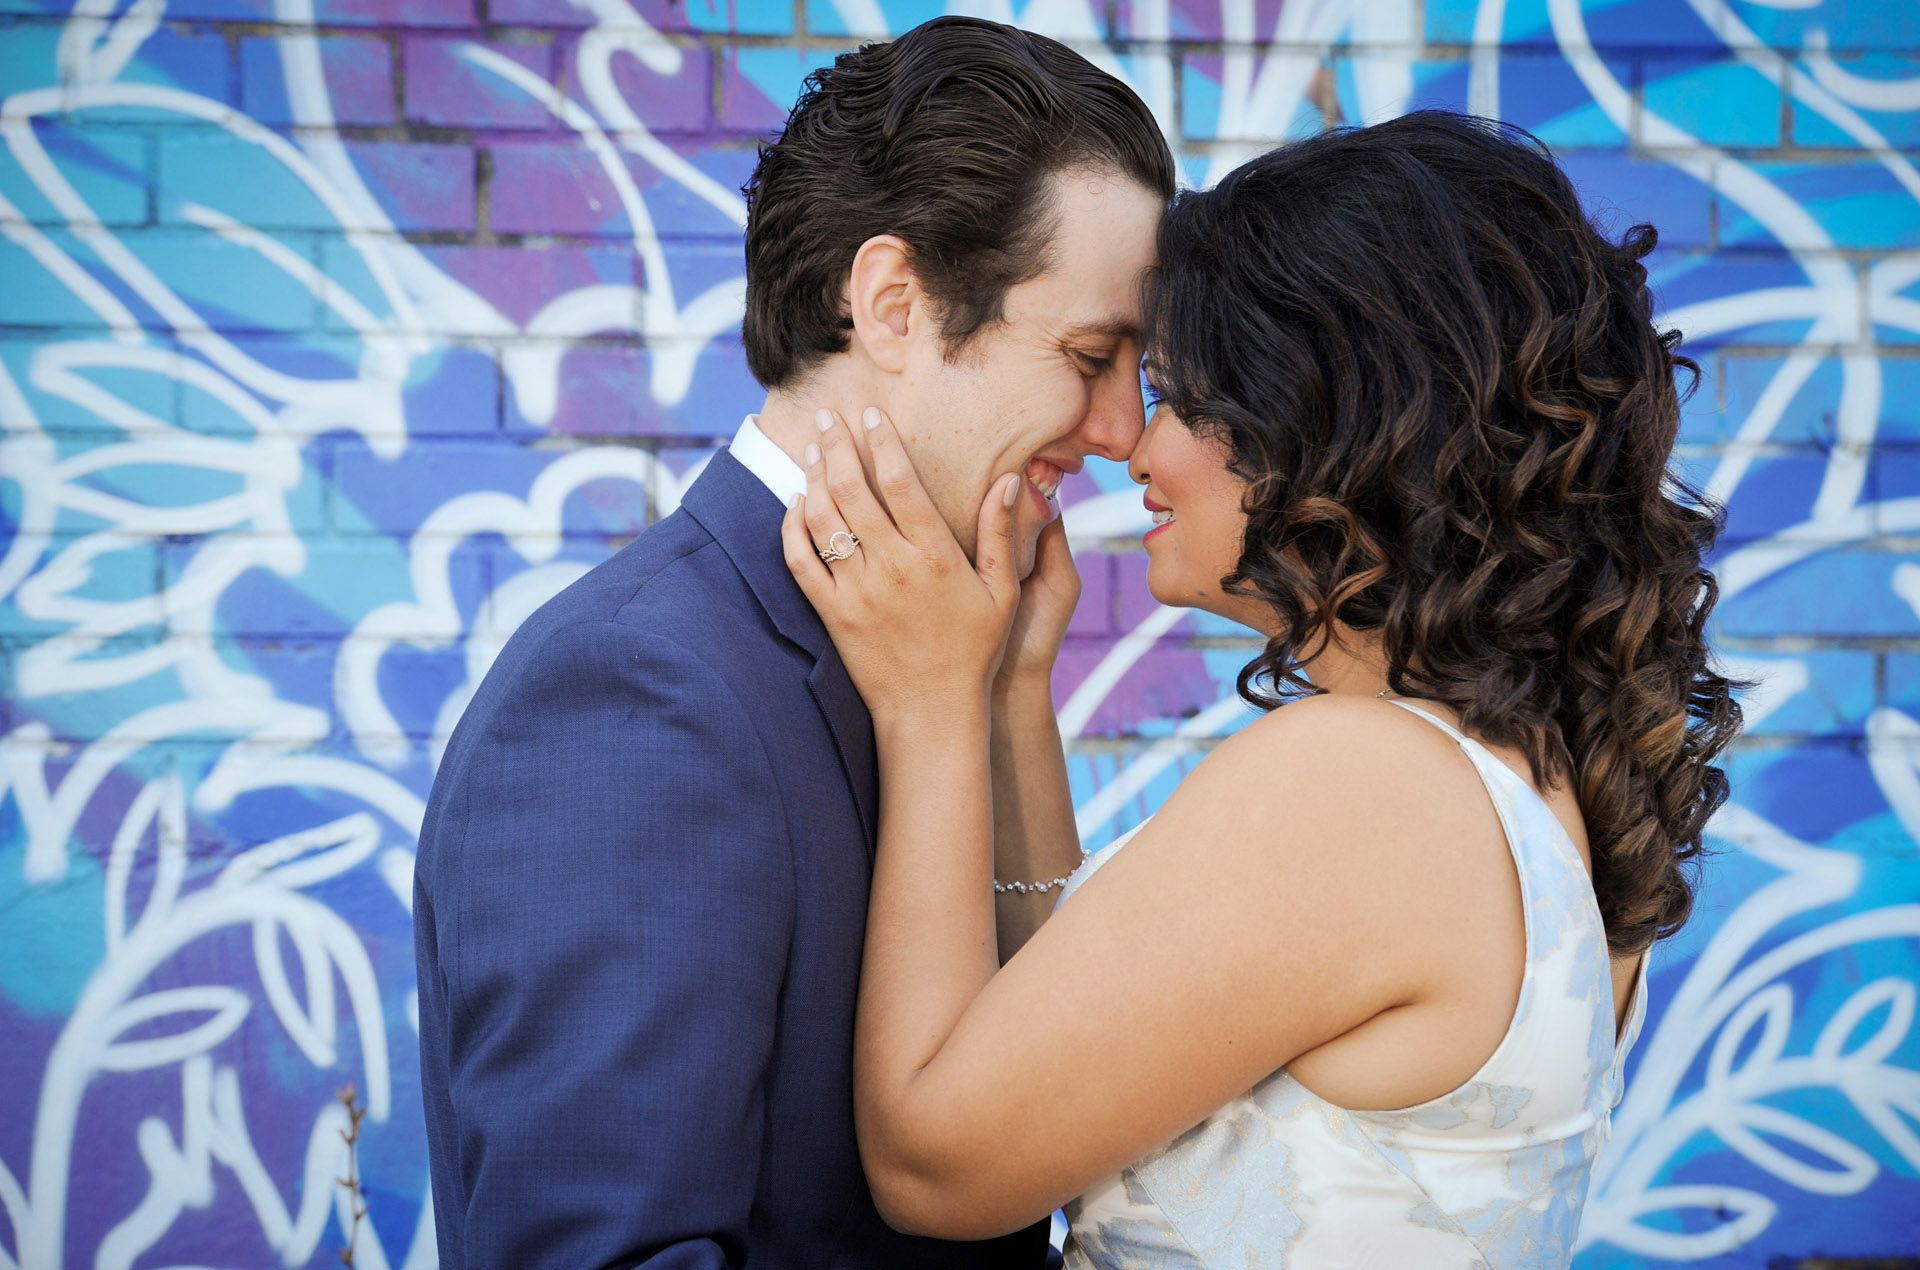 Best Detroit lifestyles photographer's fun and candid engagement photos capture the fun vibe of this couple in the Metro Detroit and Detroit, Michigan area.